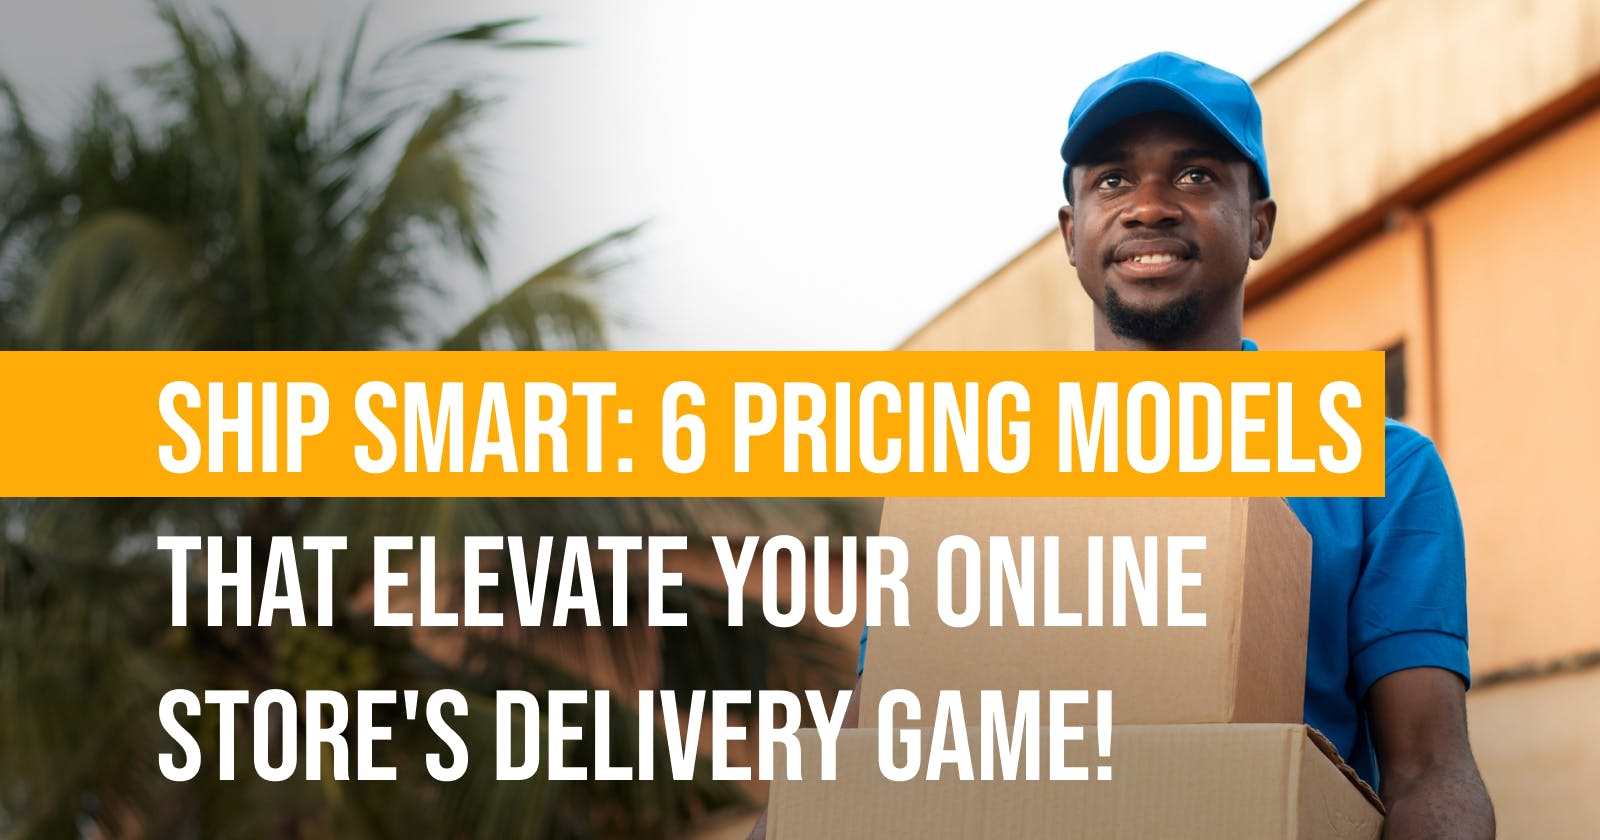 Ship Smart: 6 Pricing Models that Elevate Your Online Store's Delivery Game!